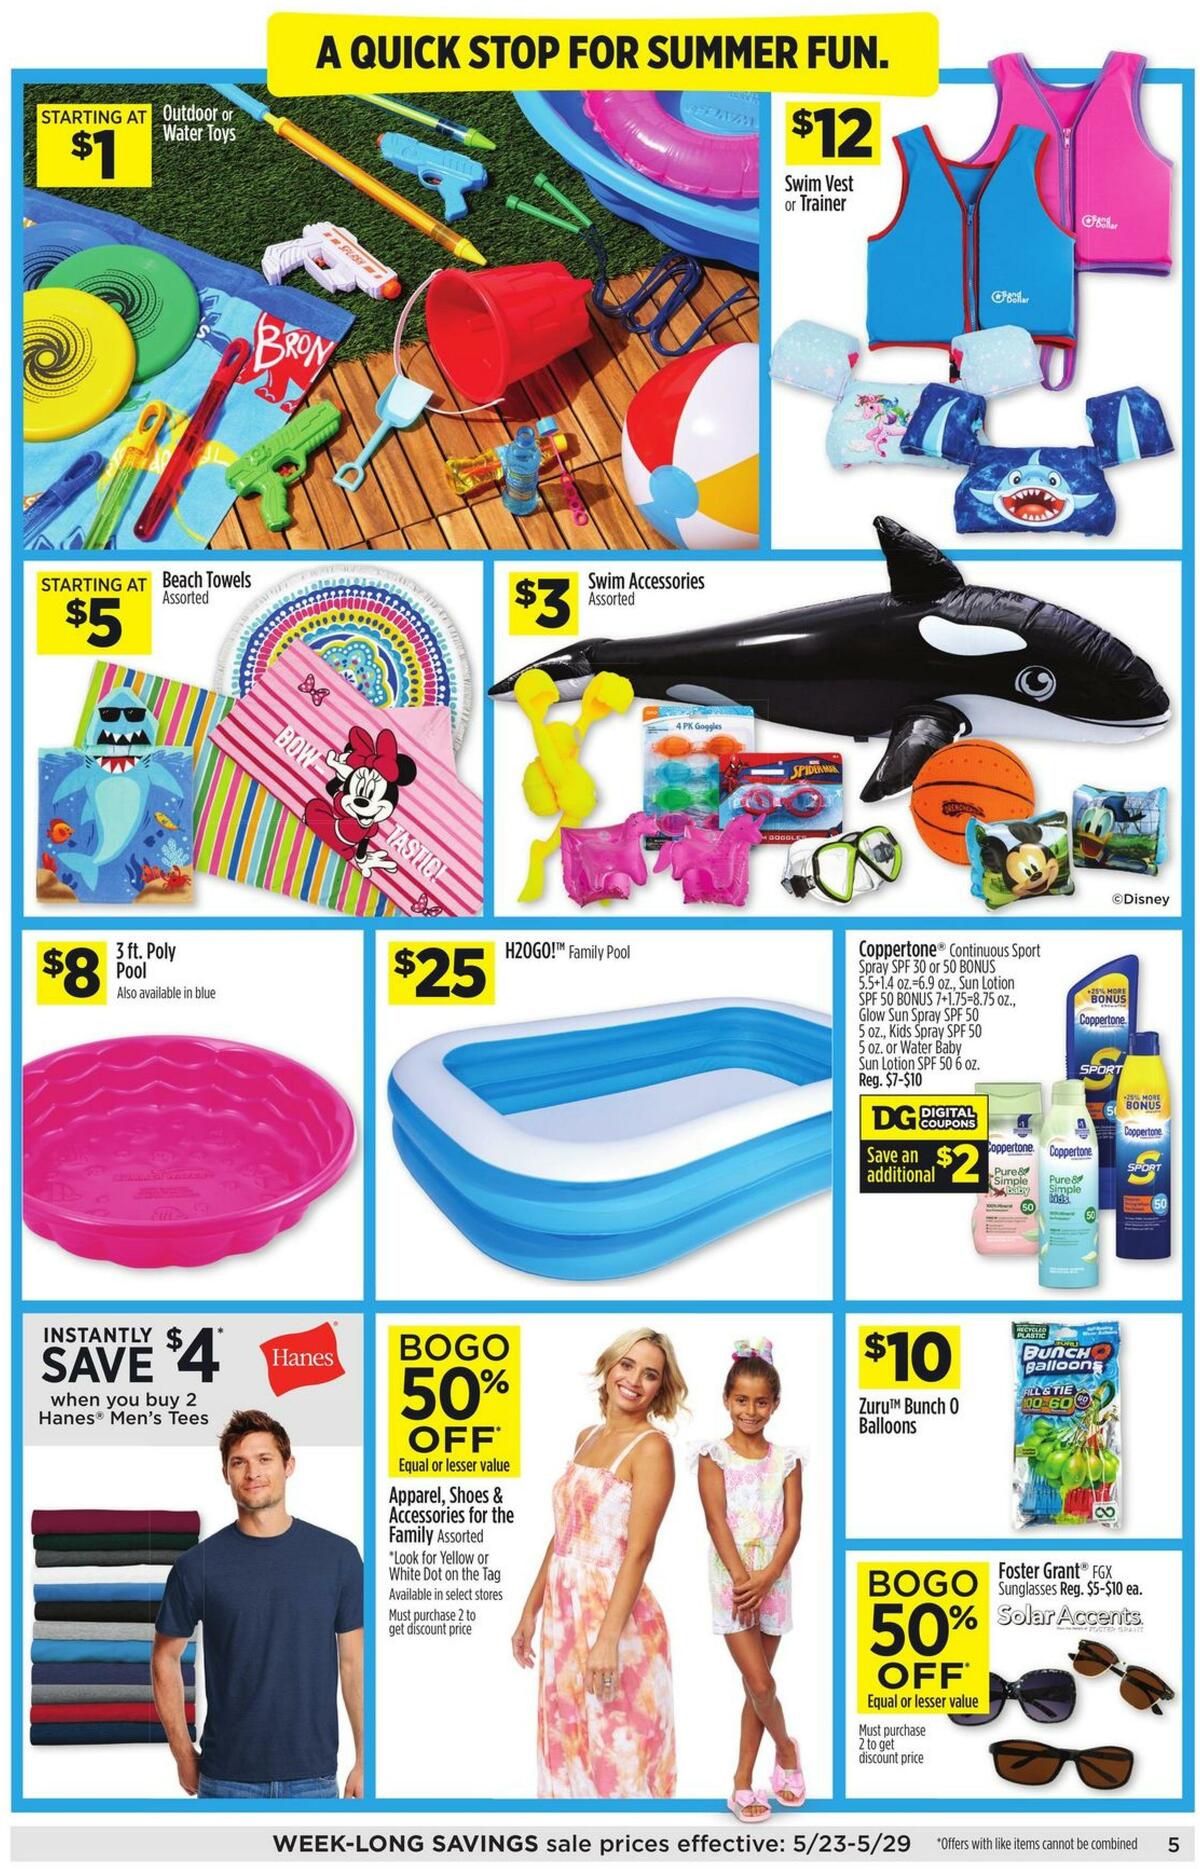 Dollar General Weekly Ad from May 23